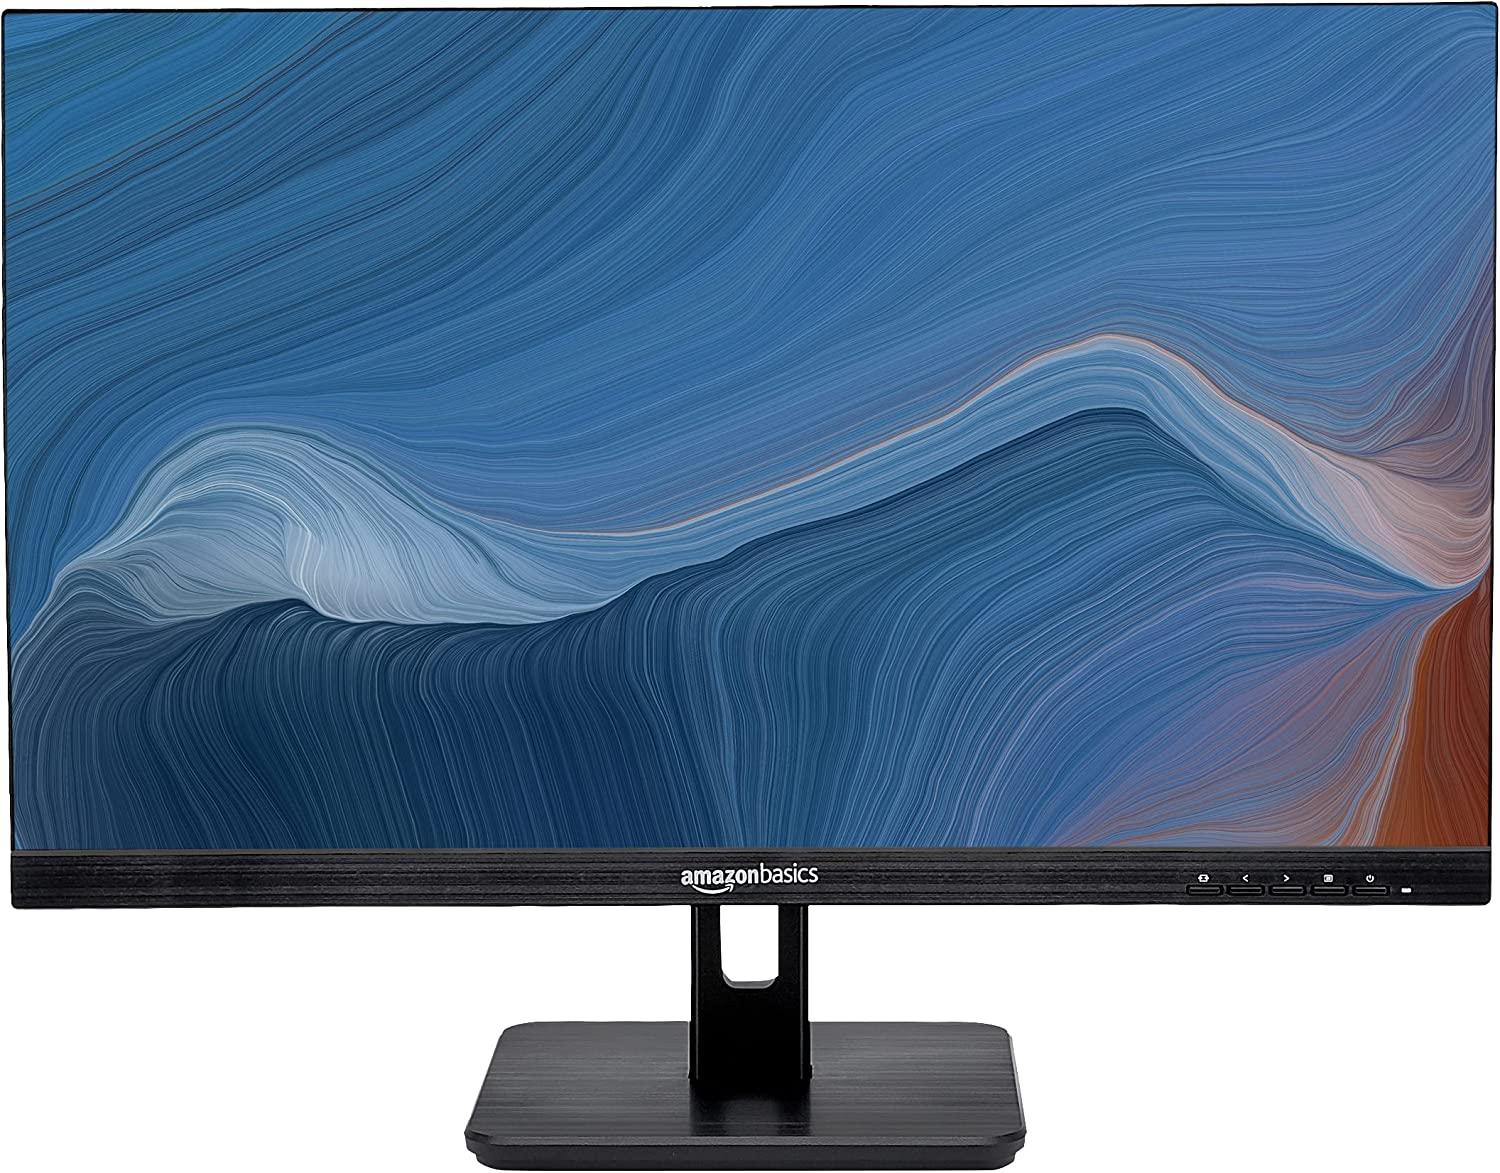 24in Amazon Basics 1080P Monitor Powered with AOC Technology for $49.55 Shipped